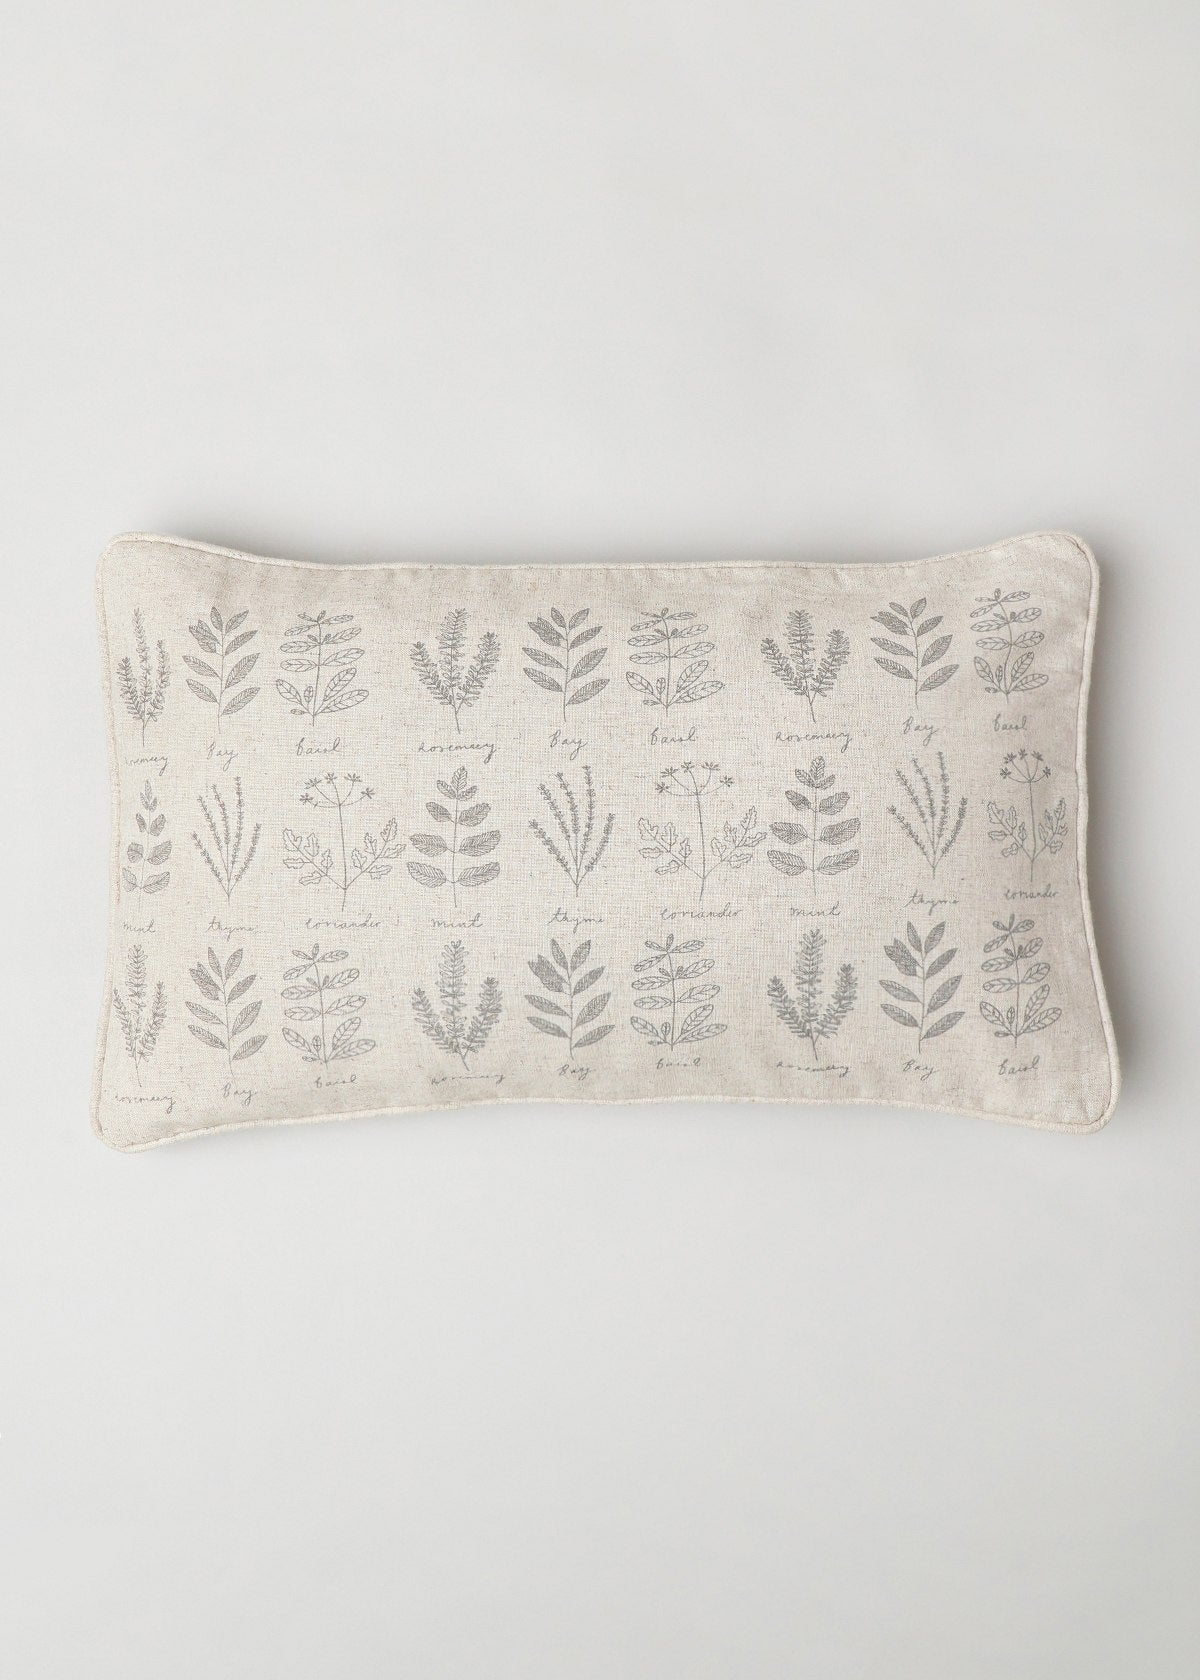 Vintage Herbs Linen 12" X 20", Ferns 16" , Linen Solid 16" Set Of 3 Combo Cotton Cushion Cover - Green And Beige